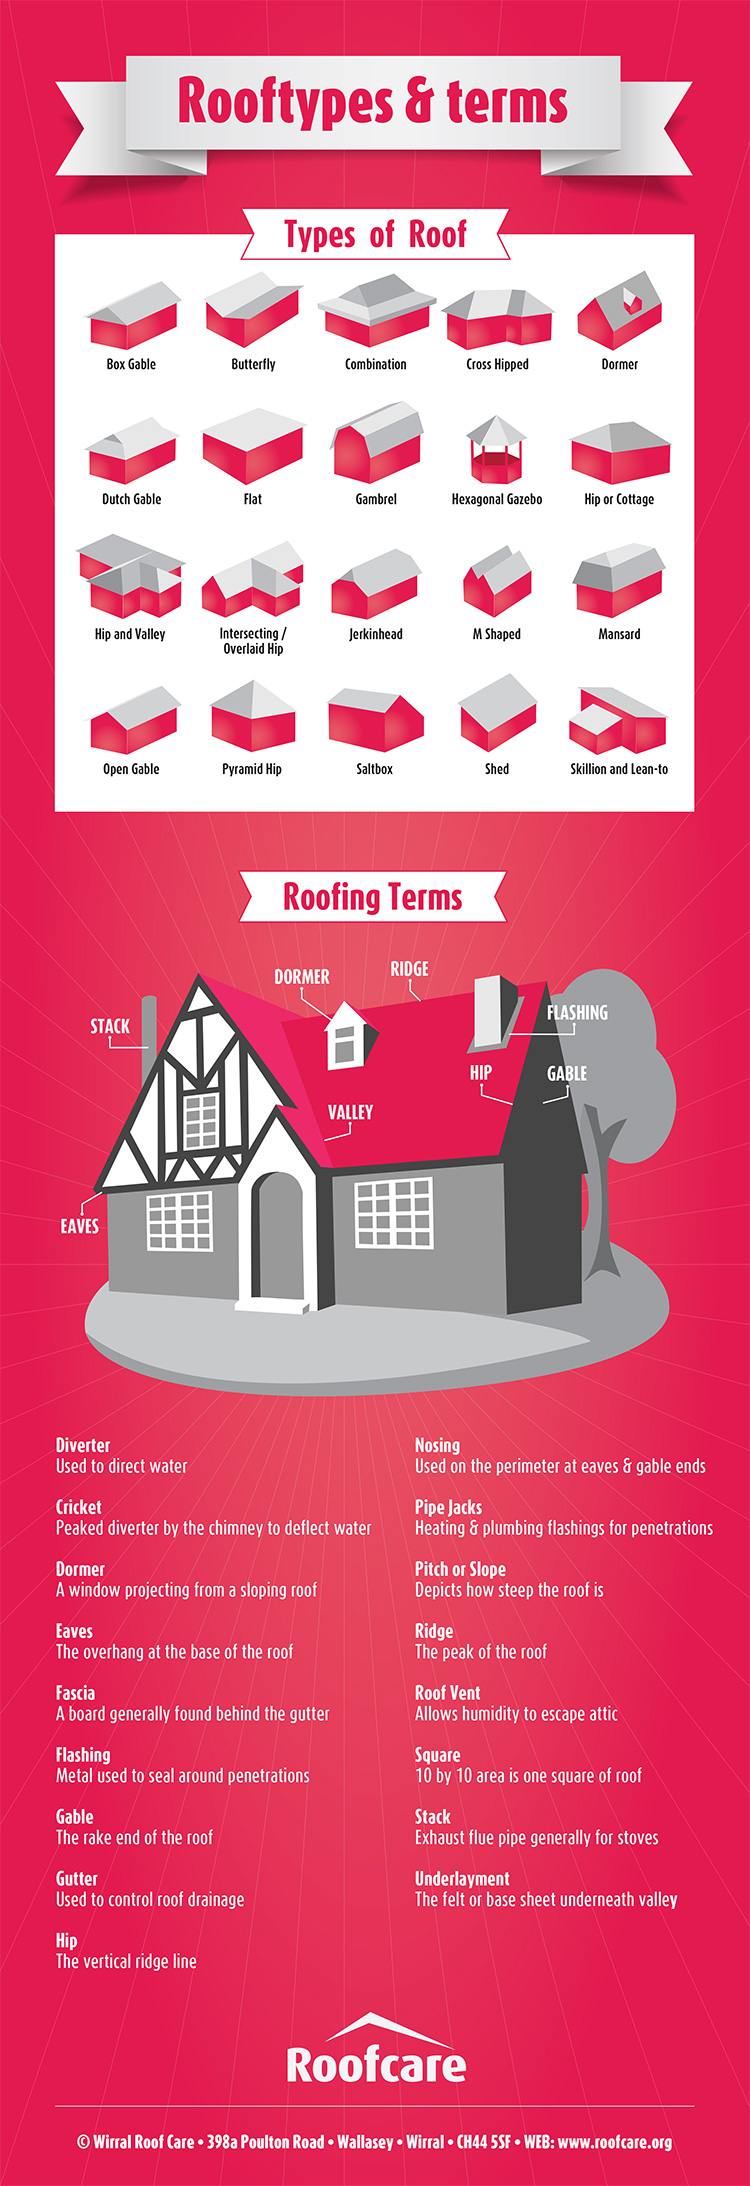 Choosing Your Roof